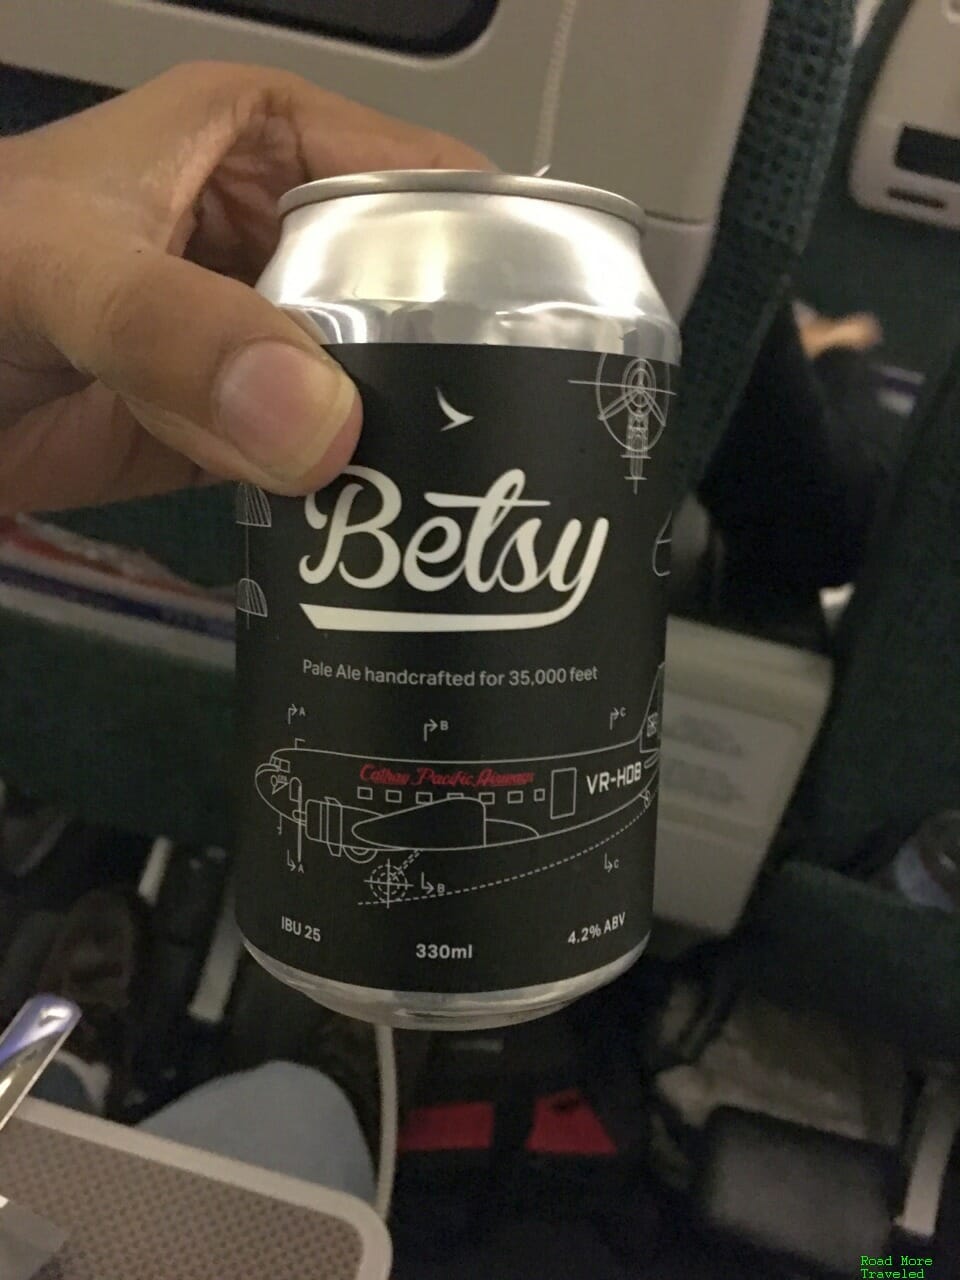 Cathay Pacific Betsy beer can